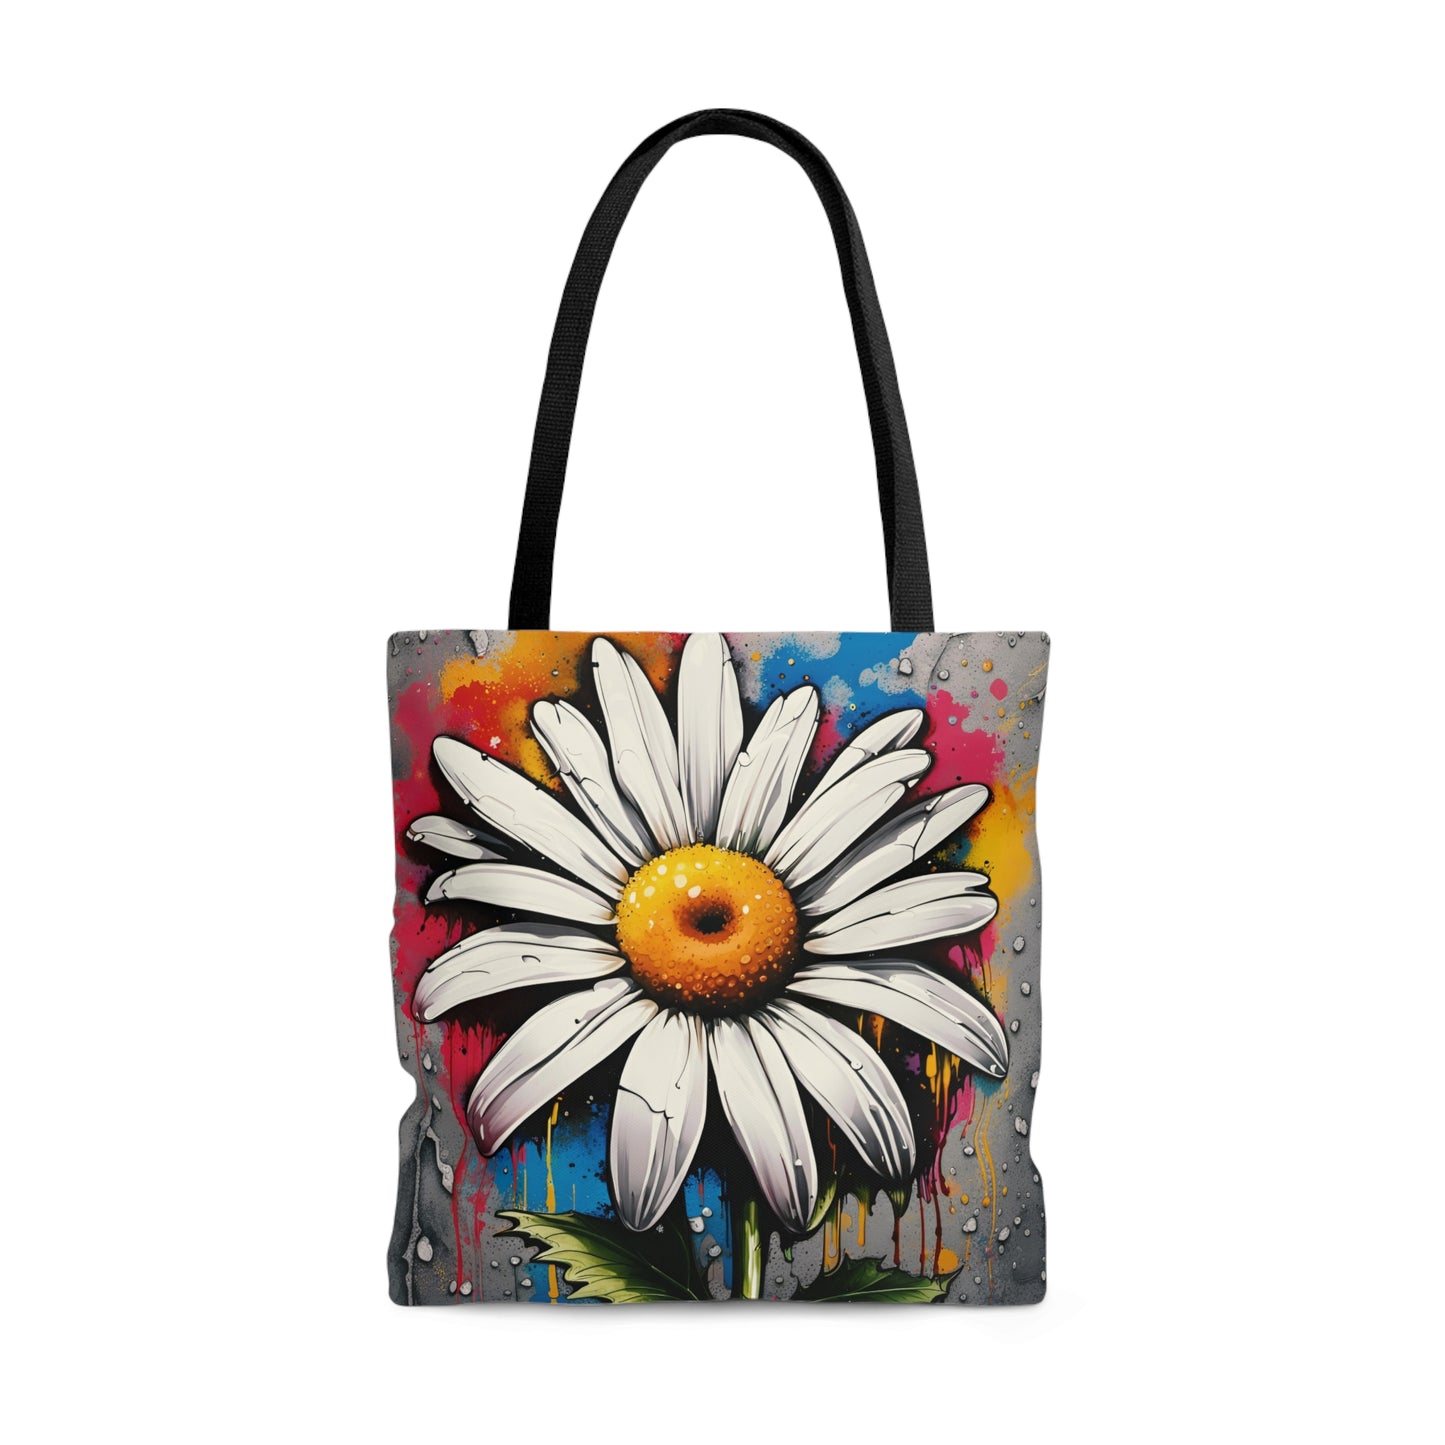 Street Art Style Graffiti Daisy Printed on Tote Bag Front